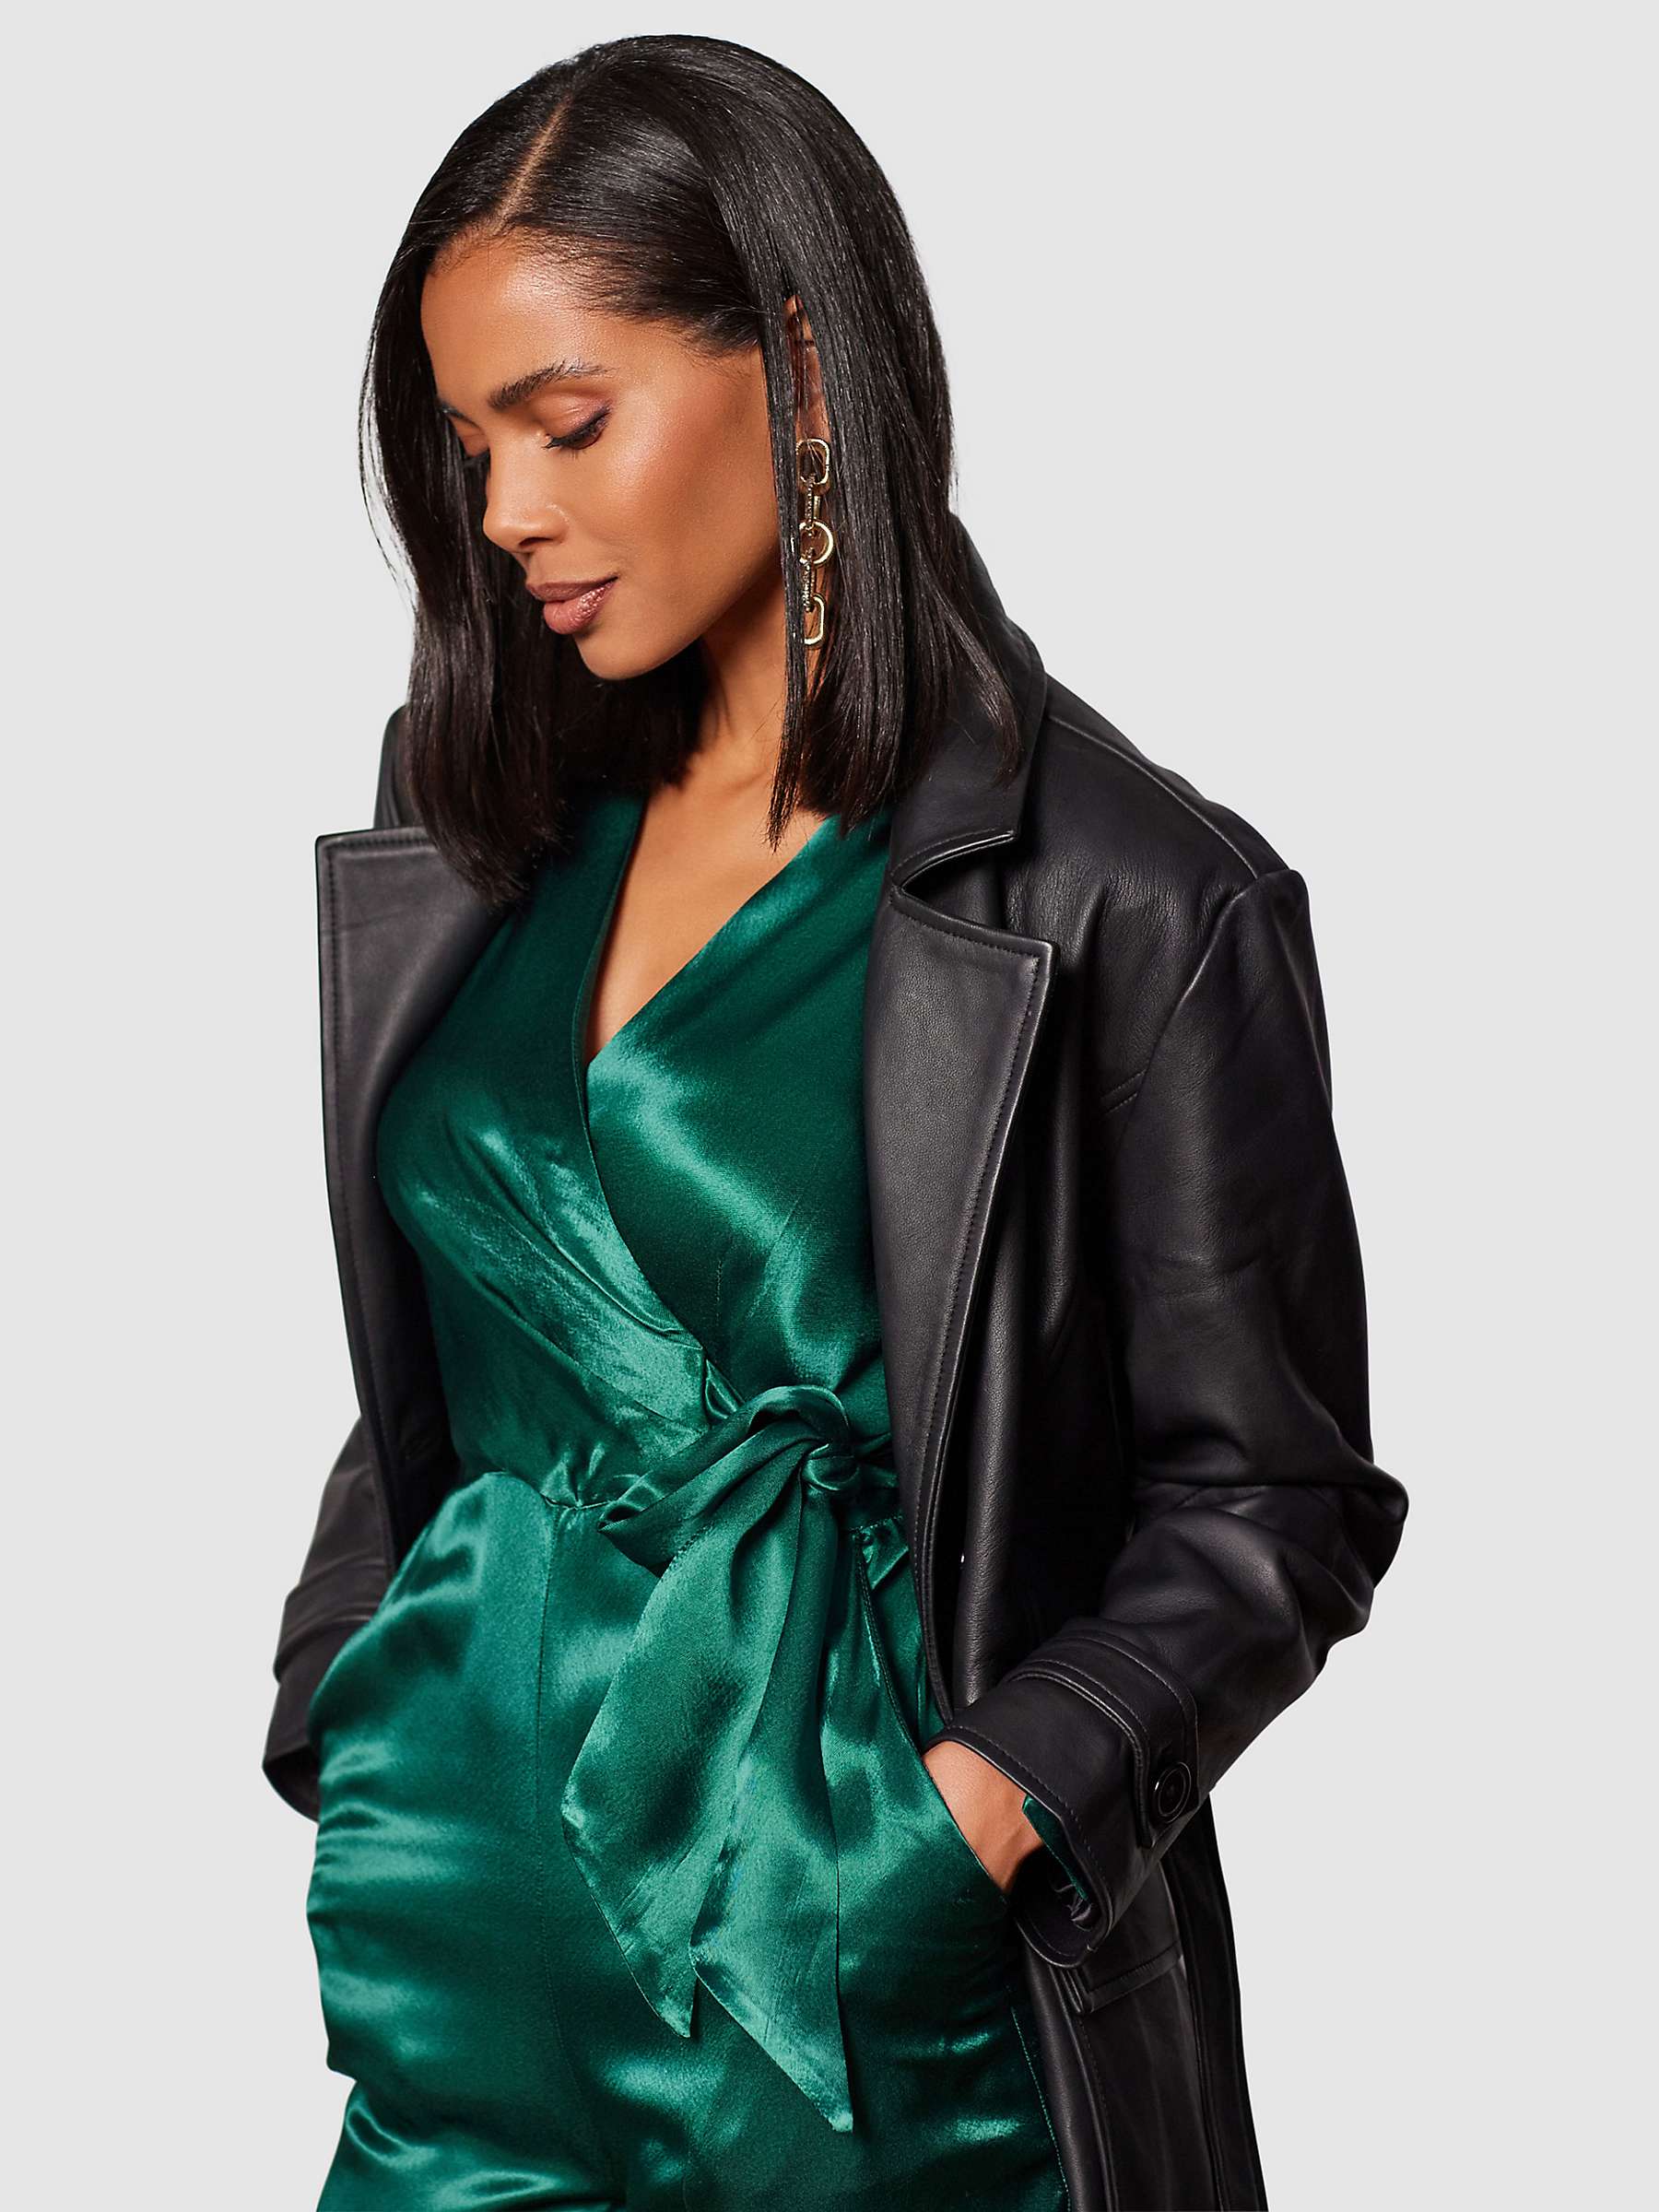 Buy Closet London Leather Trench Coat, Black Online at johnlewis.com